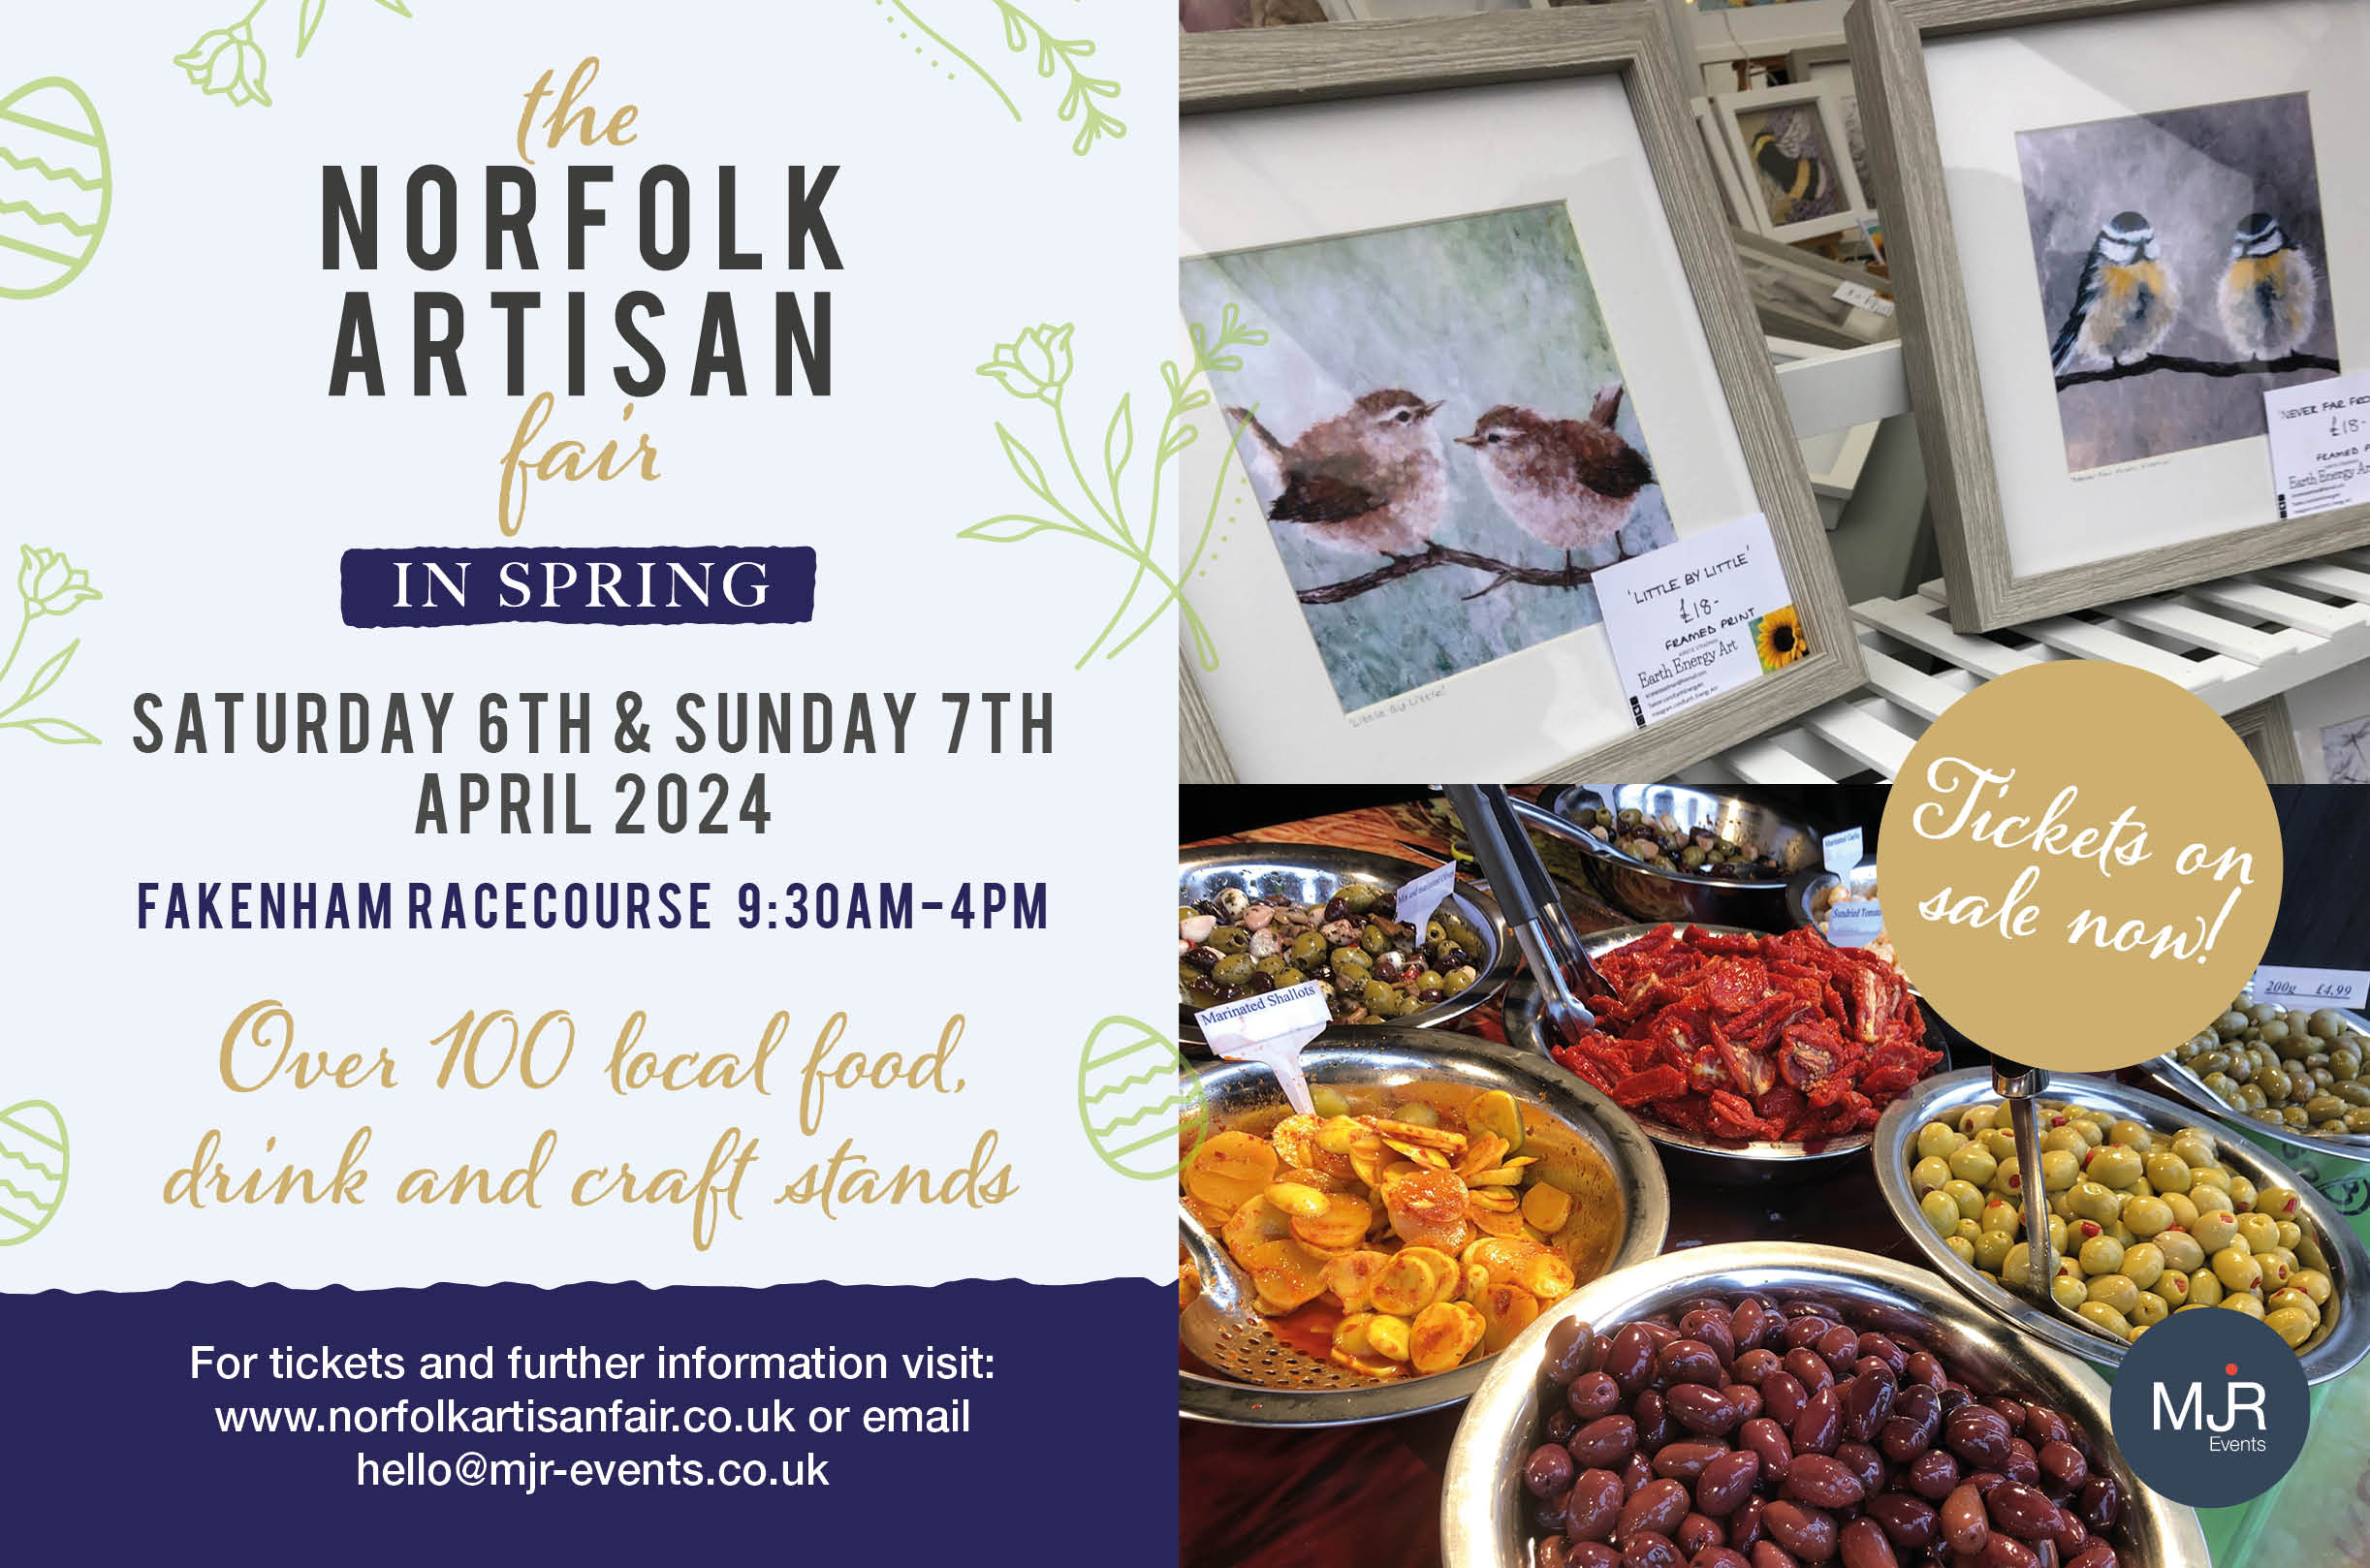 The Norfolk Artisan Fair, Fakenham Racecourse, Hempton, Fakenham, Norfolk, NR21 7NY | One of the largest Artisan Fairs in the region with 100 stalls including food, drink, arts, crafts and collectables all from Norfolk Artisans. | Artisan Crafts Local Produce